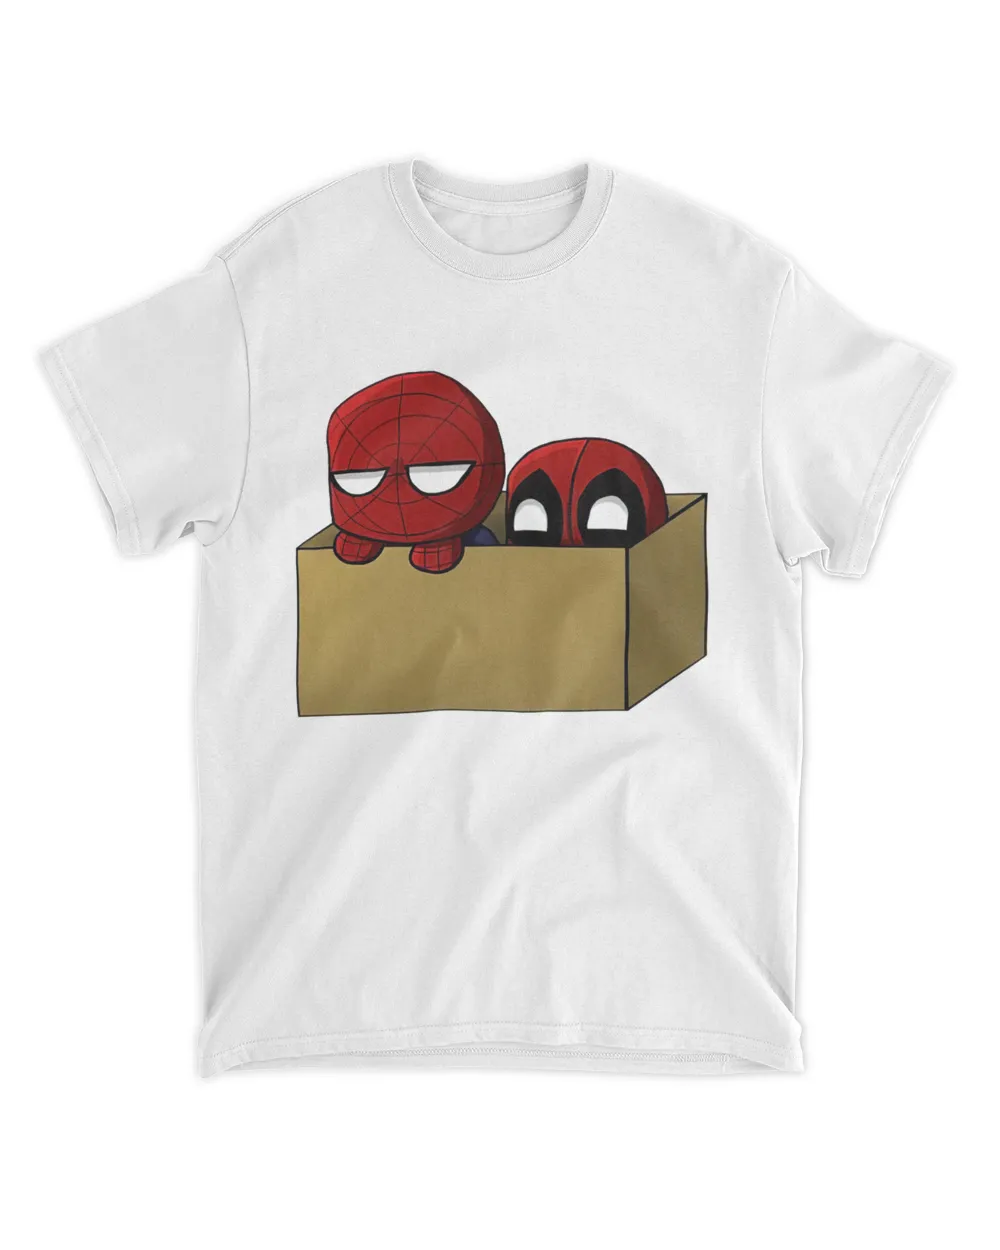 Spider With Friend In Box Shirt